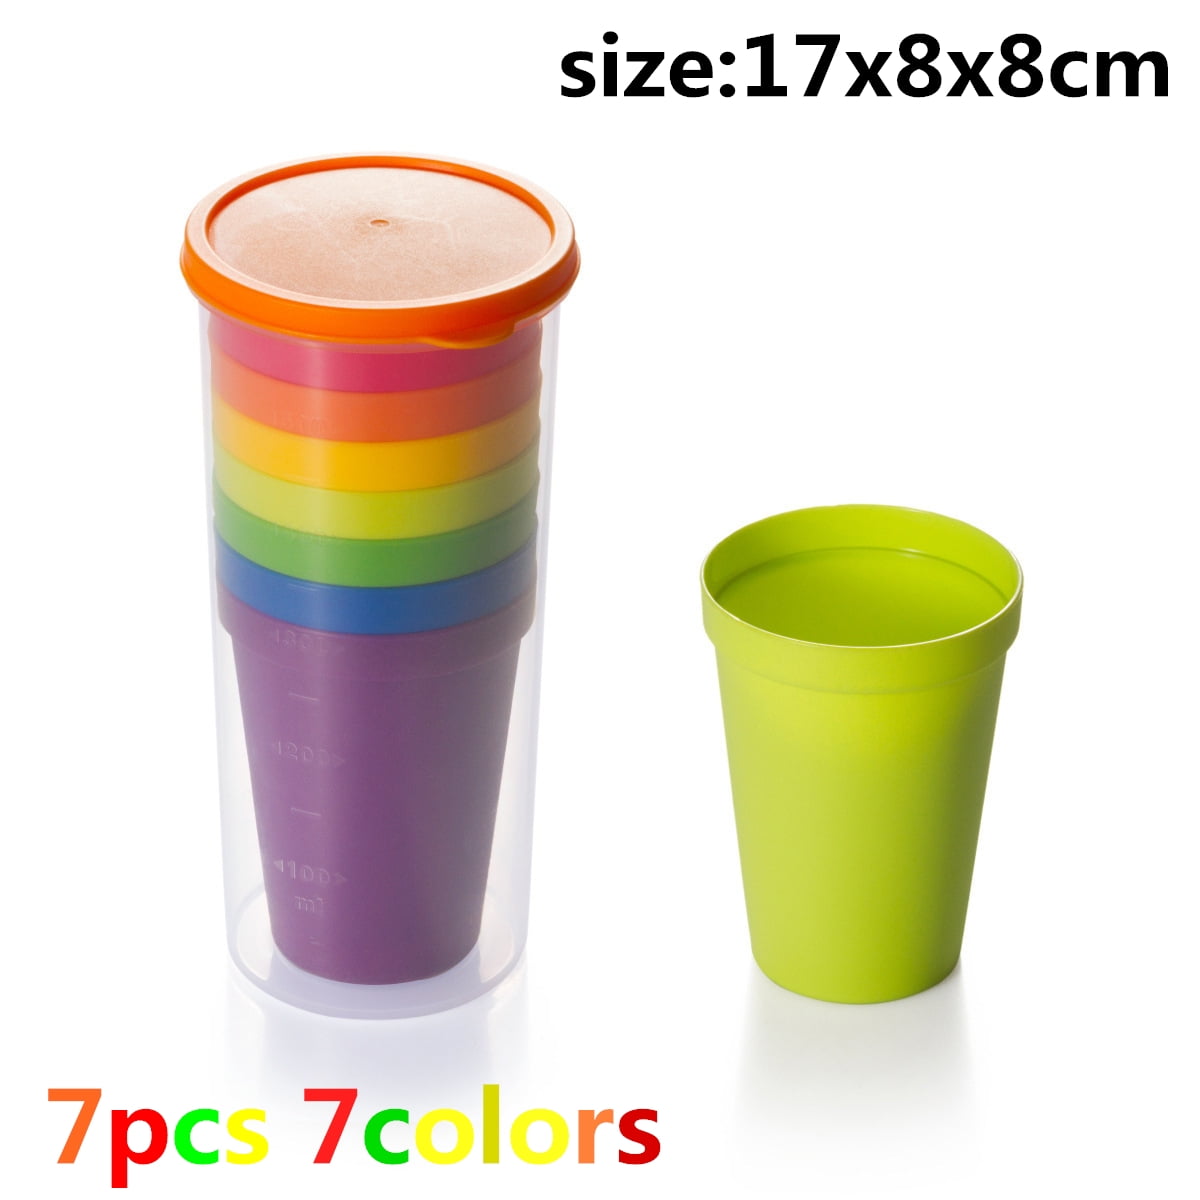 Counting Bears With Stacking Cups Montessori Color Sorting Matching Game Toys 